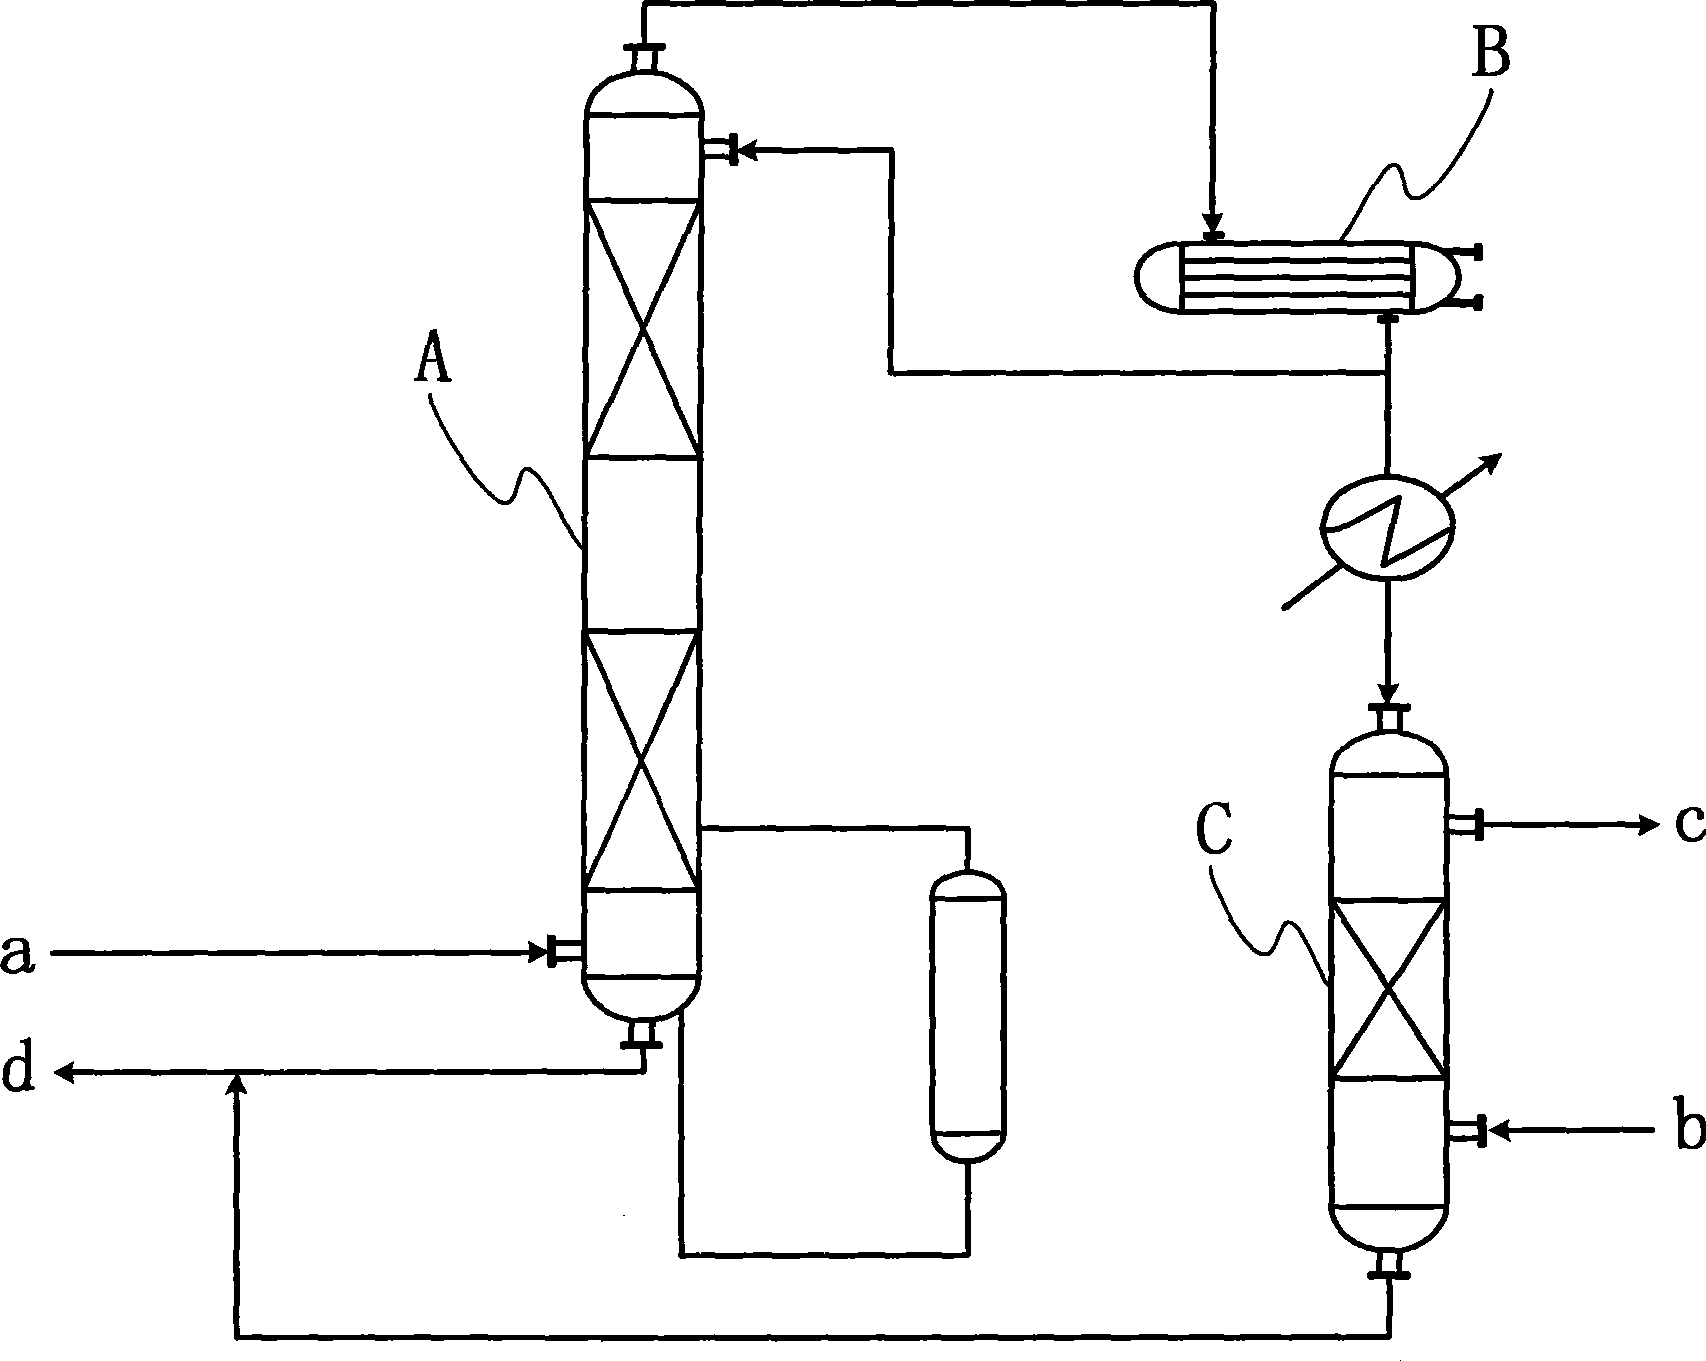 Control method of acetaldehyde content during acetic acid synthesis from methanol carbonylation